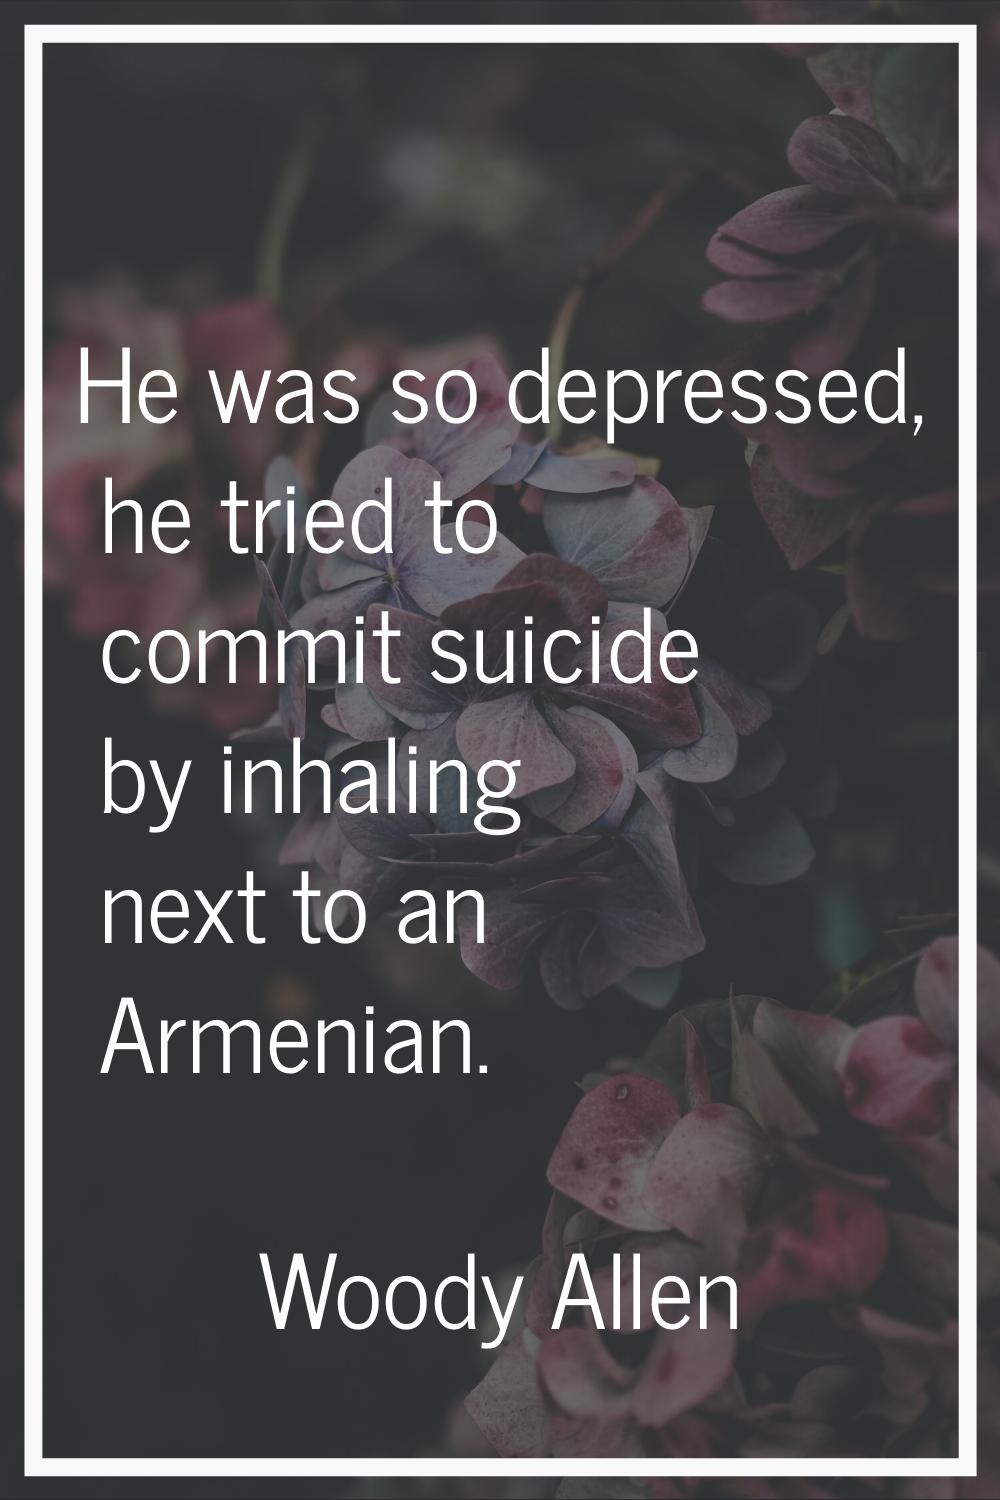 He was so depressed, he tried to commit suicide by inhaling next to an Armenian.